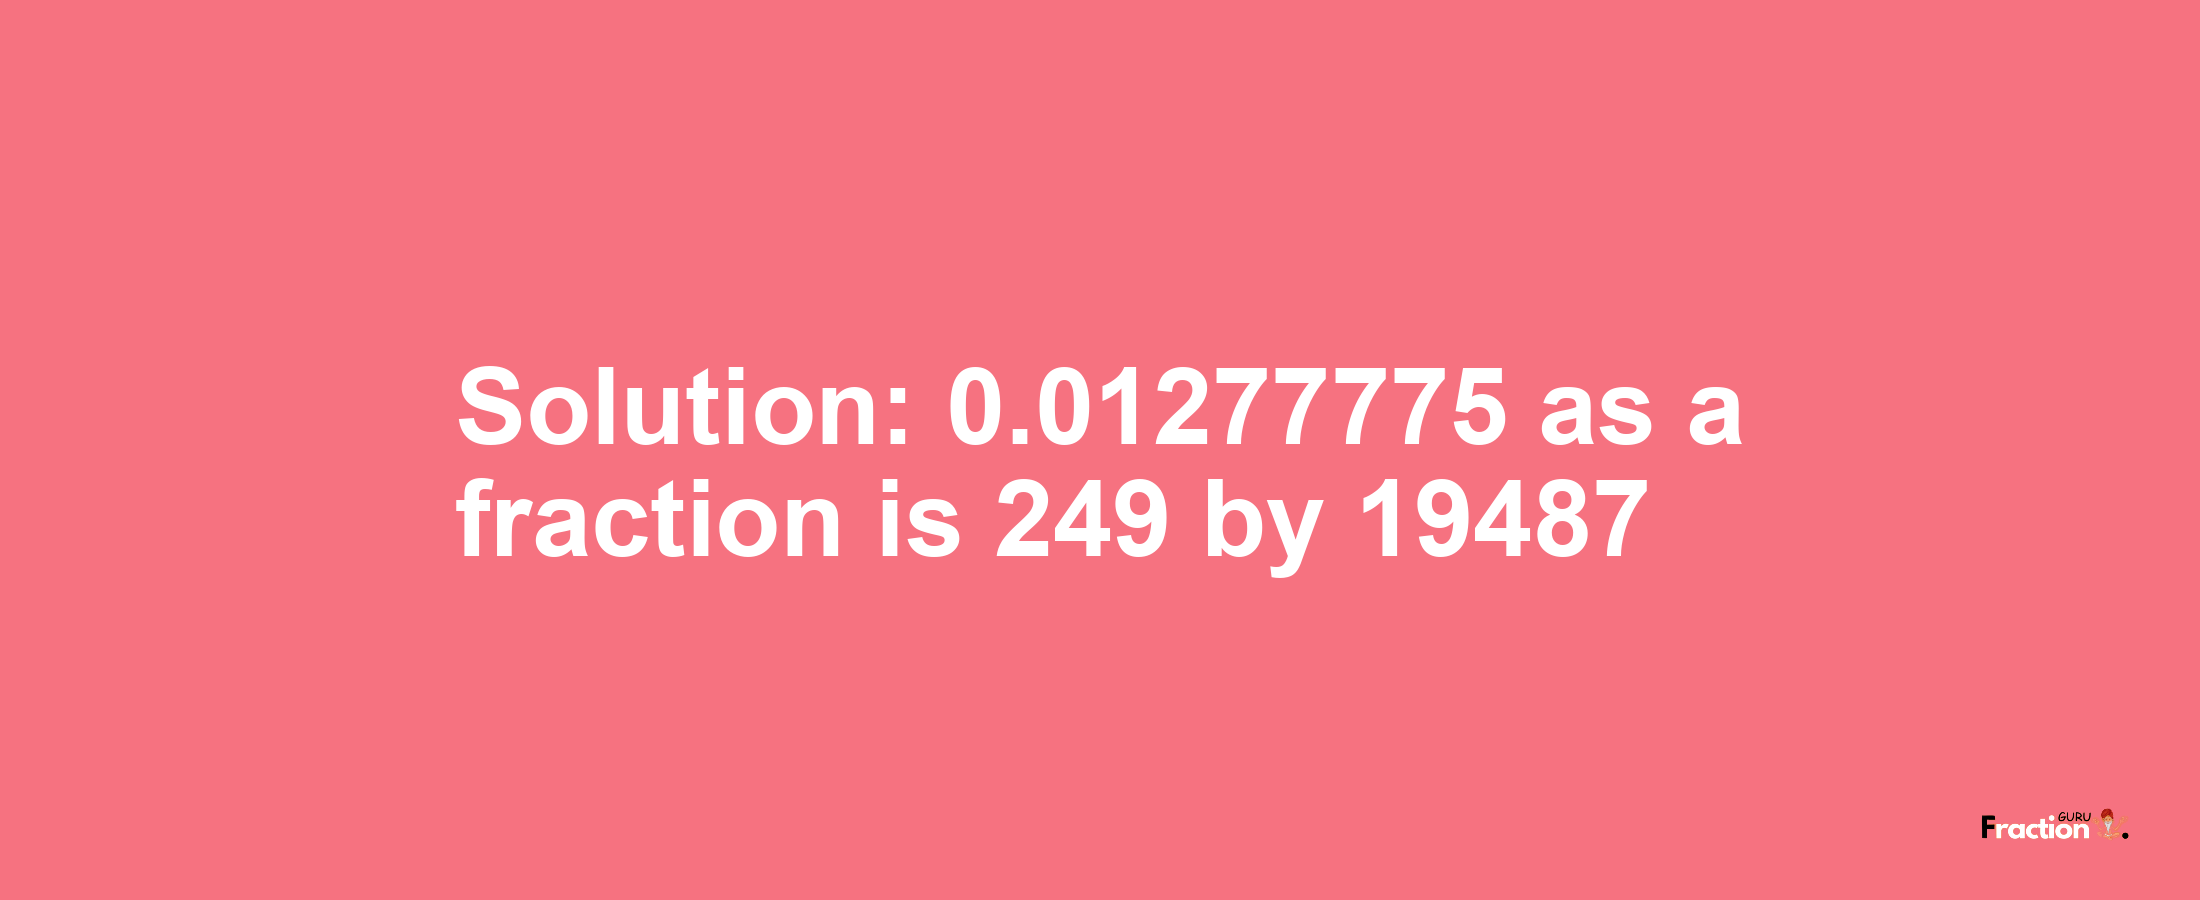 Solution:0.01277775 as a fraction is 249/19487